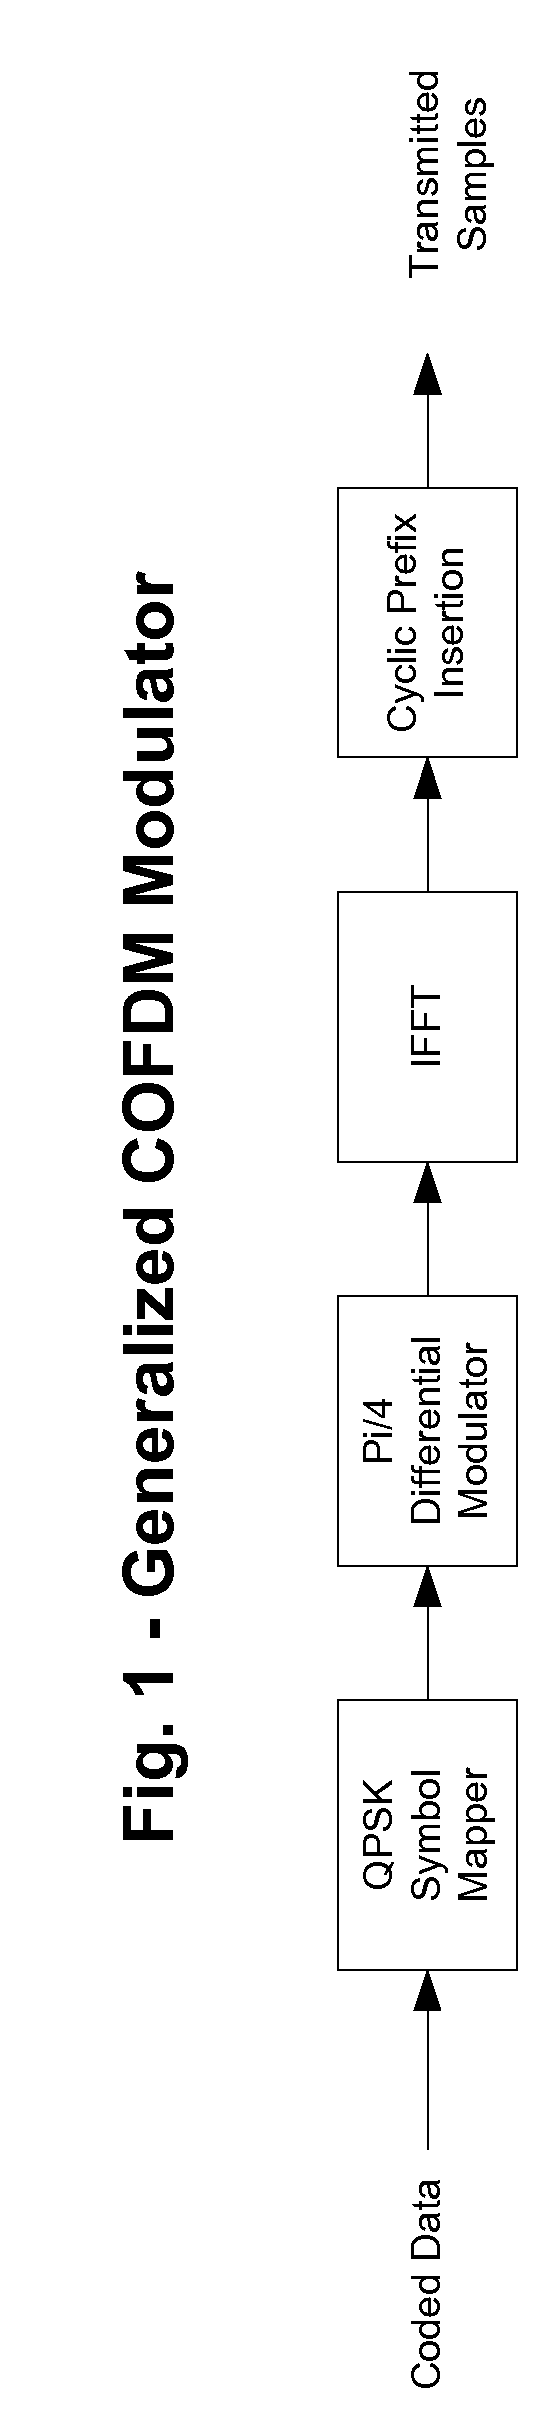 Overlay modulation of cofdm using phase and amplitude offset carriers